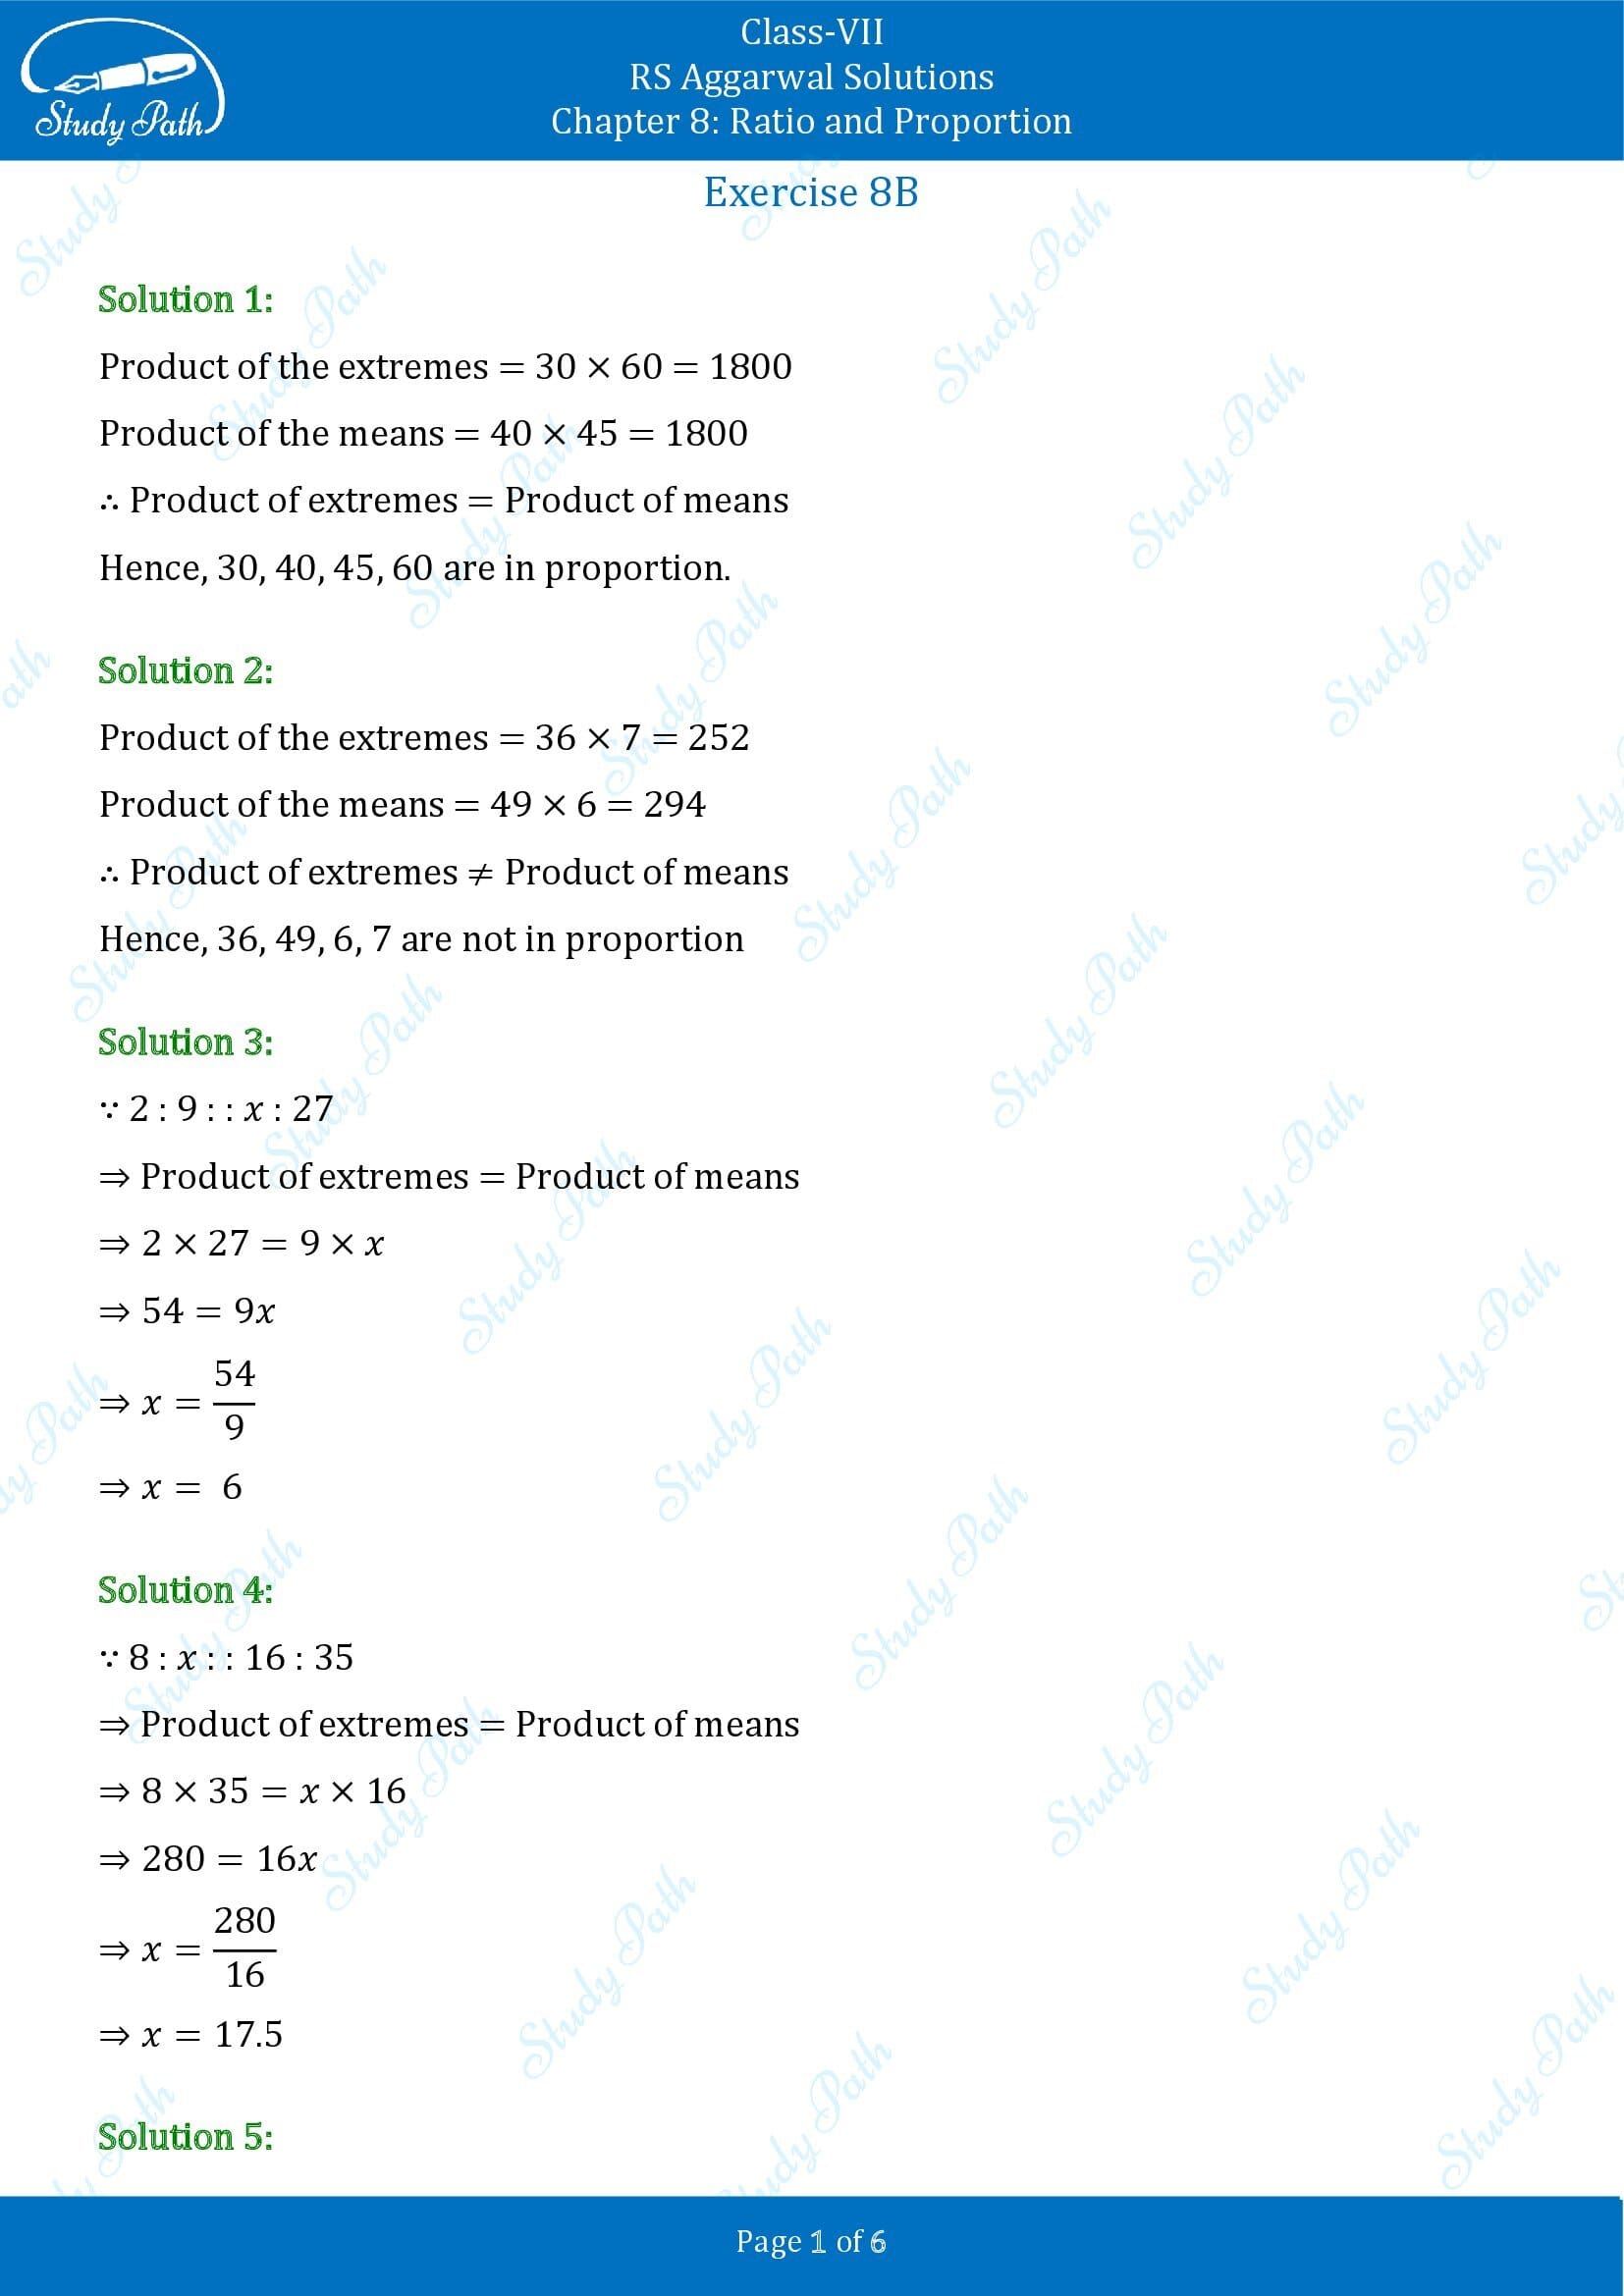 RS Aggarwal Solutions Class 7 Chapter 8 Ratio and Proportion Exercise 8B 00001